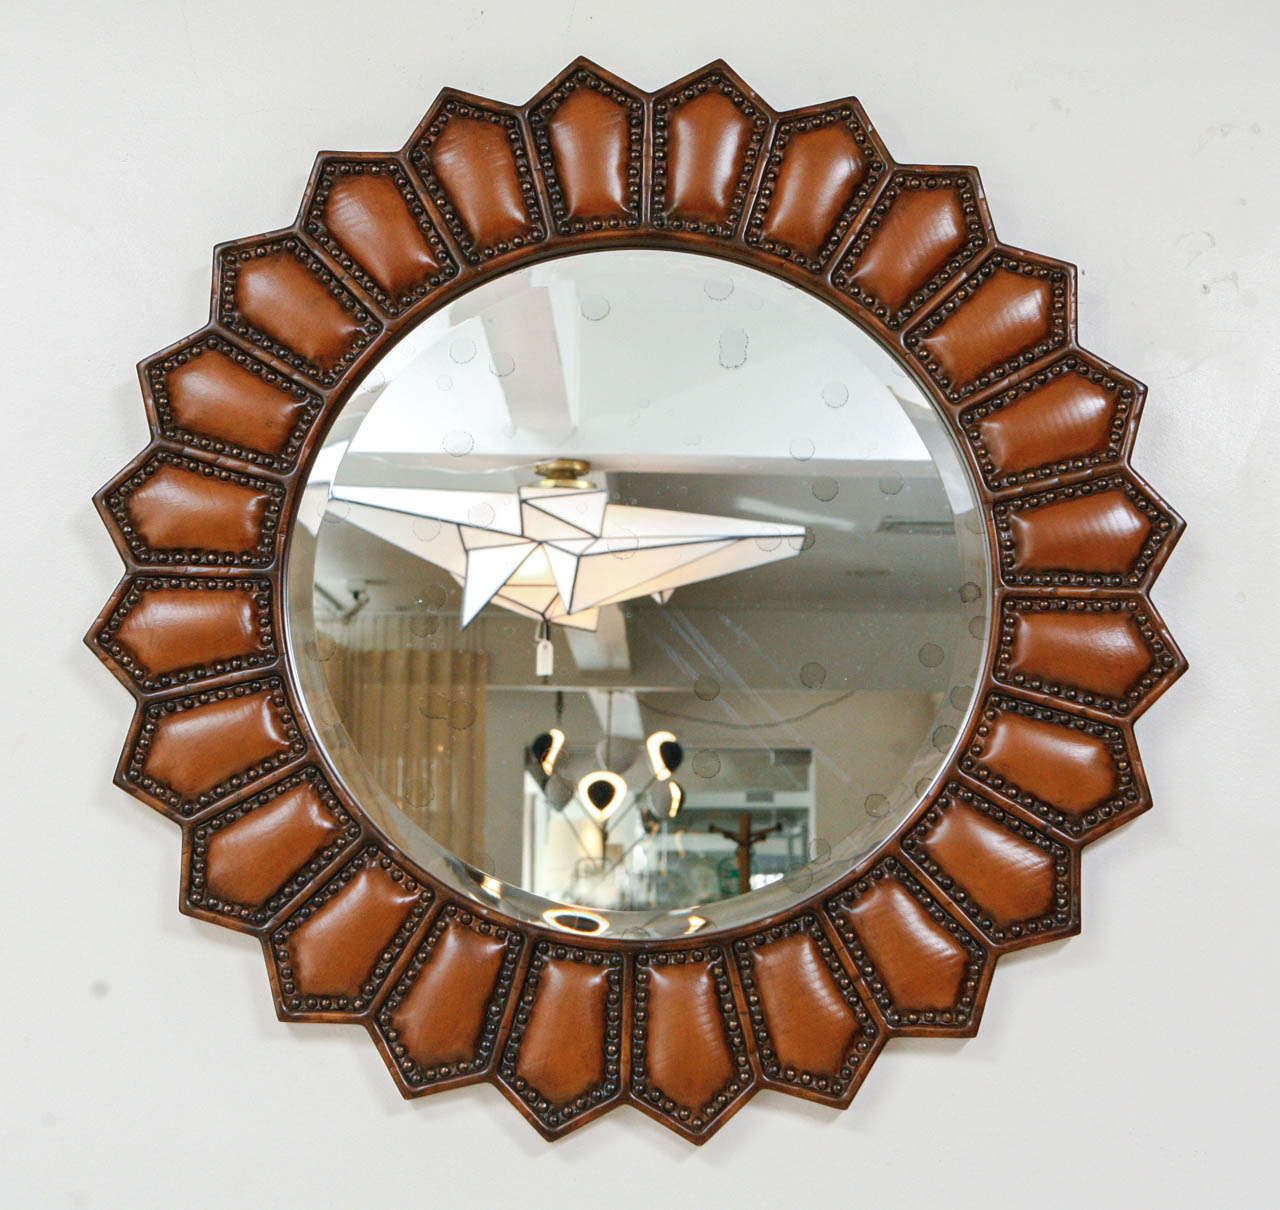 Antique Leather Framed Mirror With Brass Tacksbaker At 1stdibs Intended For Antique Brass Wall Mirrors (View 2 of 15)